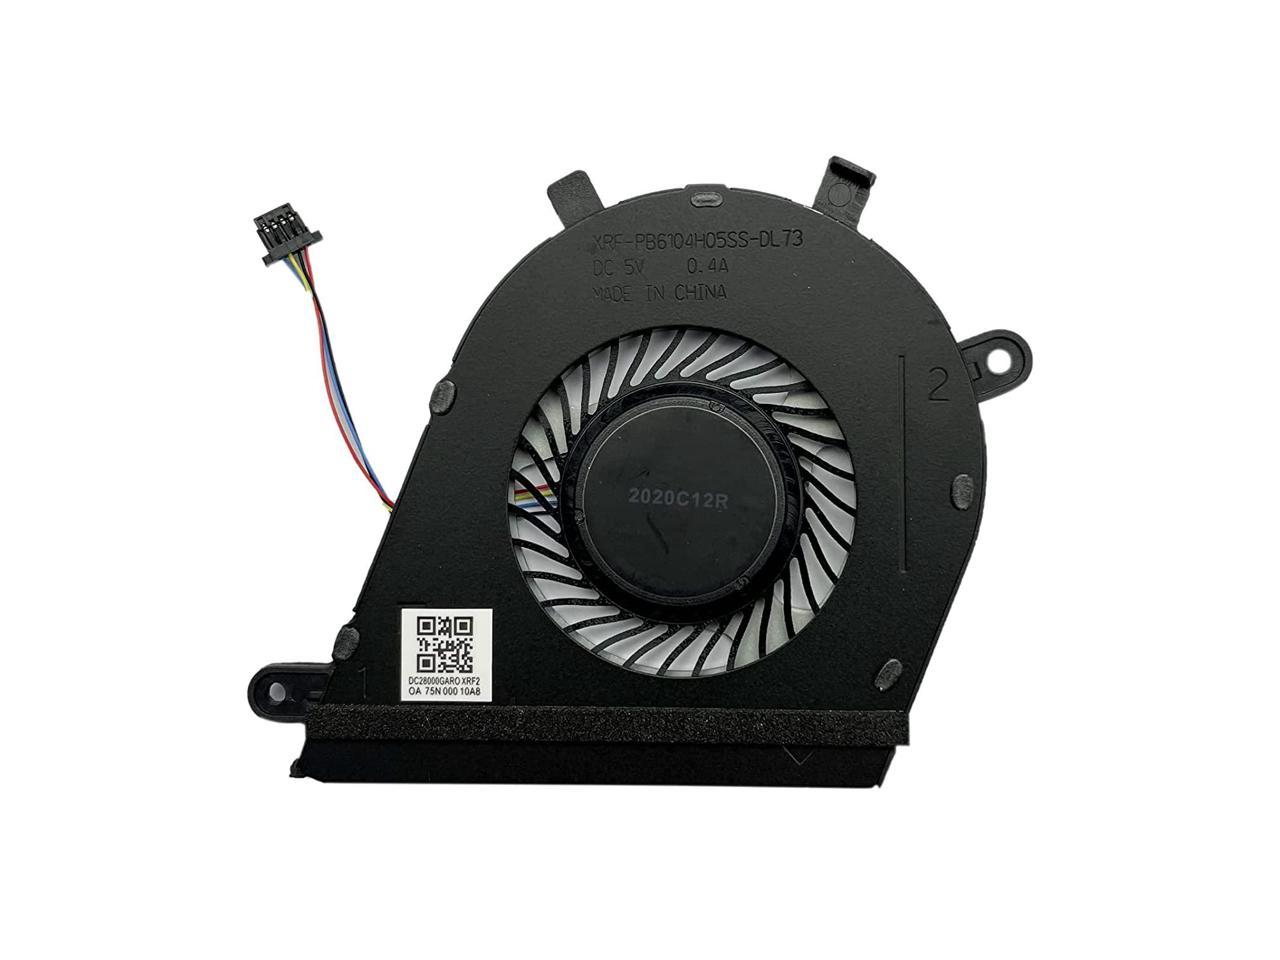 Rangale CPU Cooling Fan Compatible for Dell Inspiron 13 7370 7373 I7373-5558GRY-PUS Series Laptop DJFK0 0DJFK0 